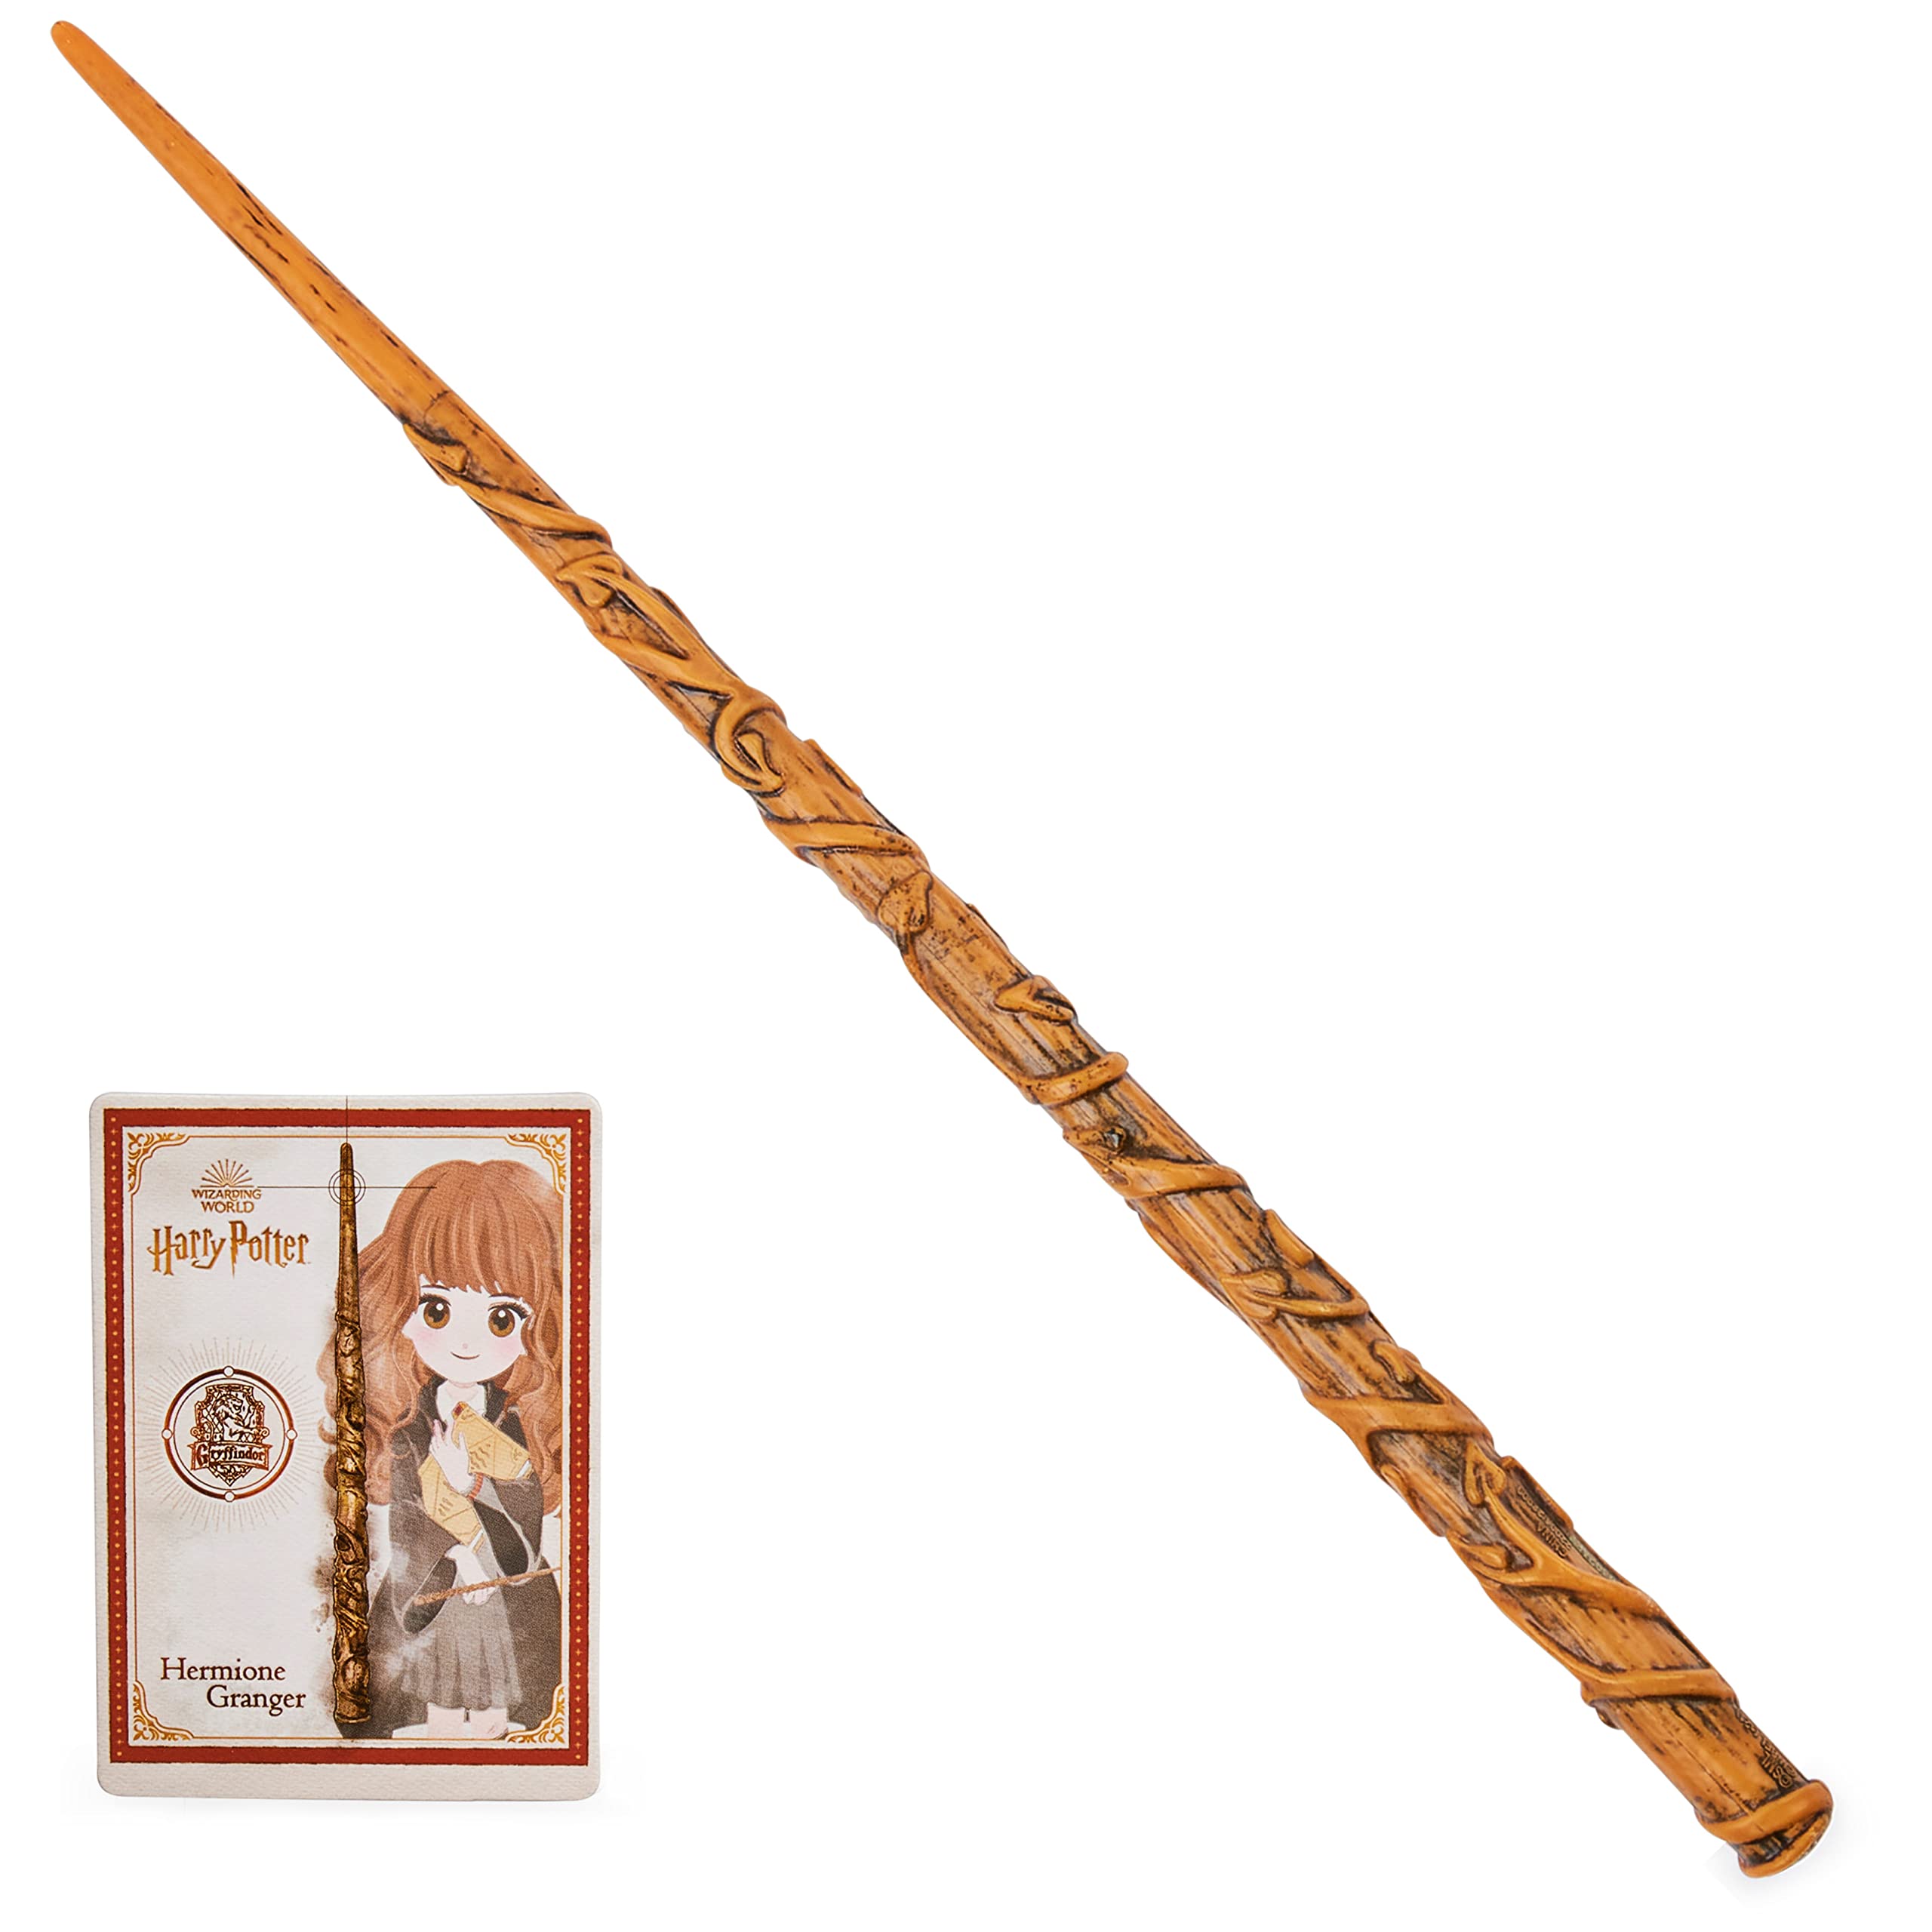 Wizarding World Harry Potter, 12-inch Spellbinding Hermione Granger Magic Wand with Collectible Spell Card, Kids Toys for Ages 6 and up